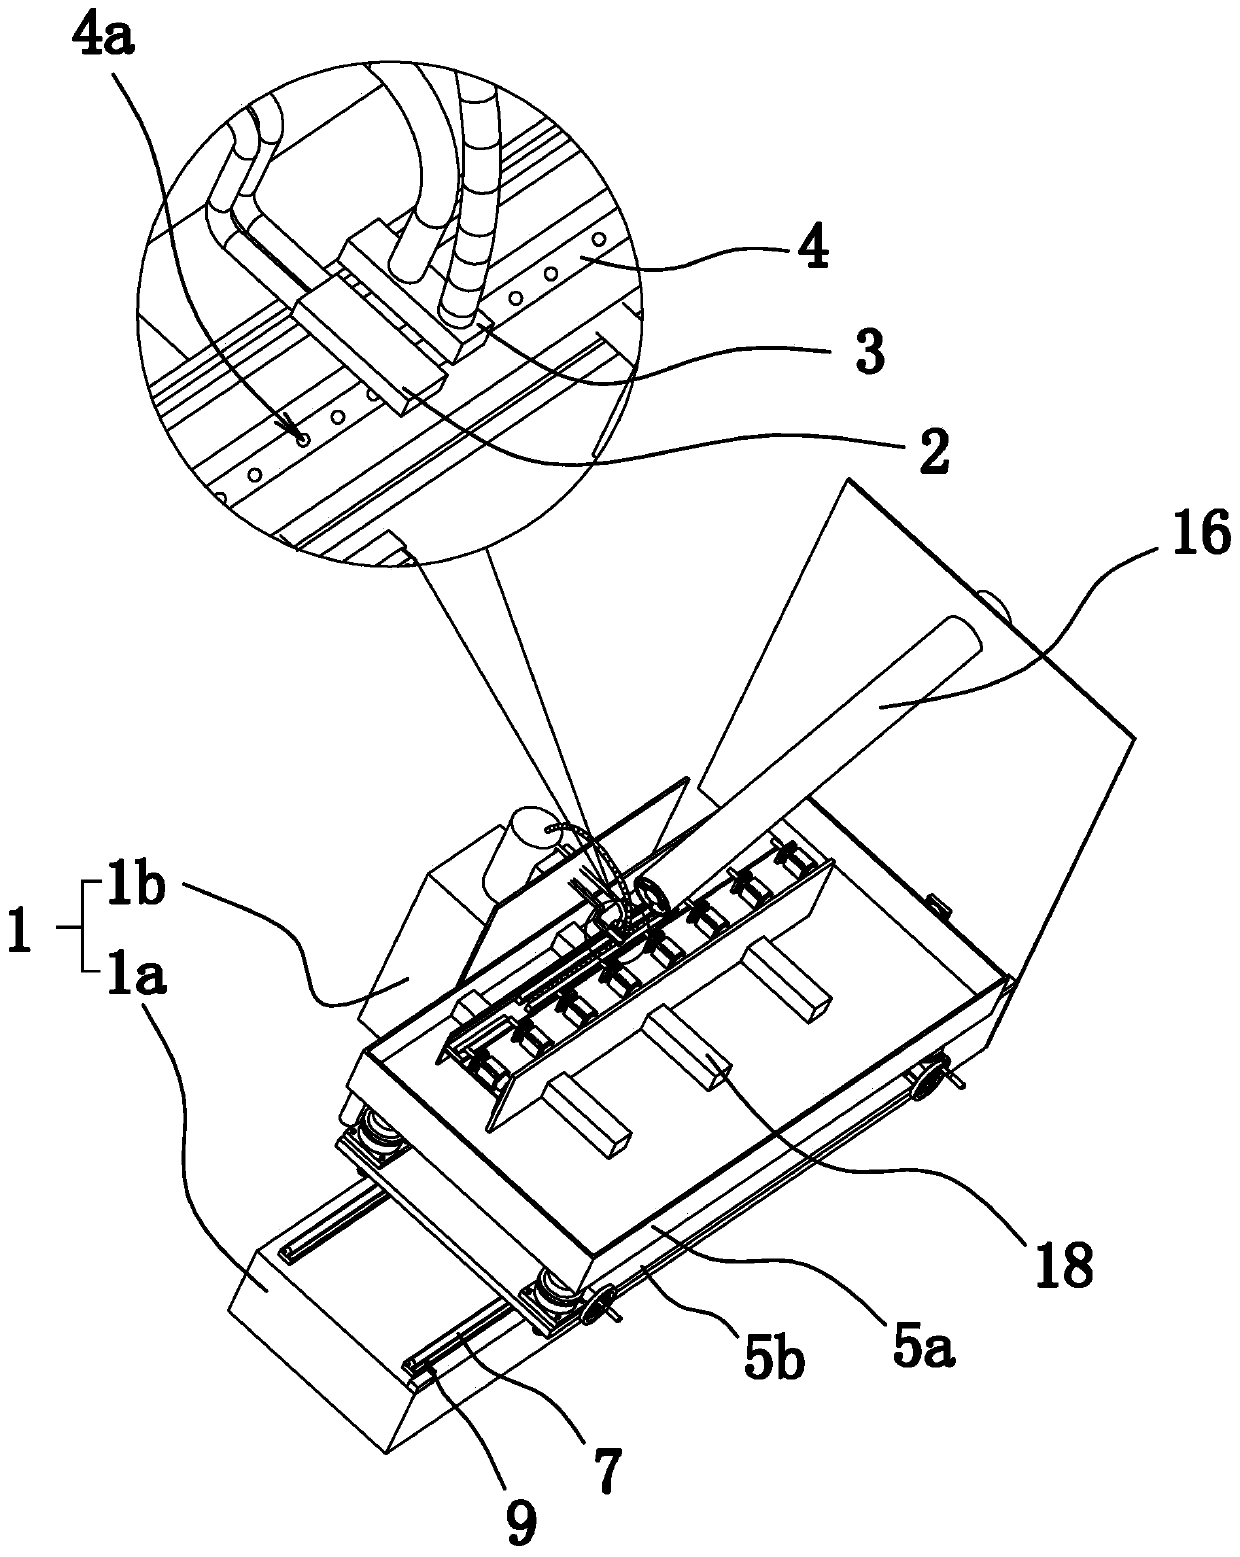 Tooth surface quenching device for rack